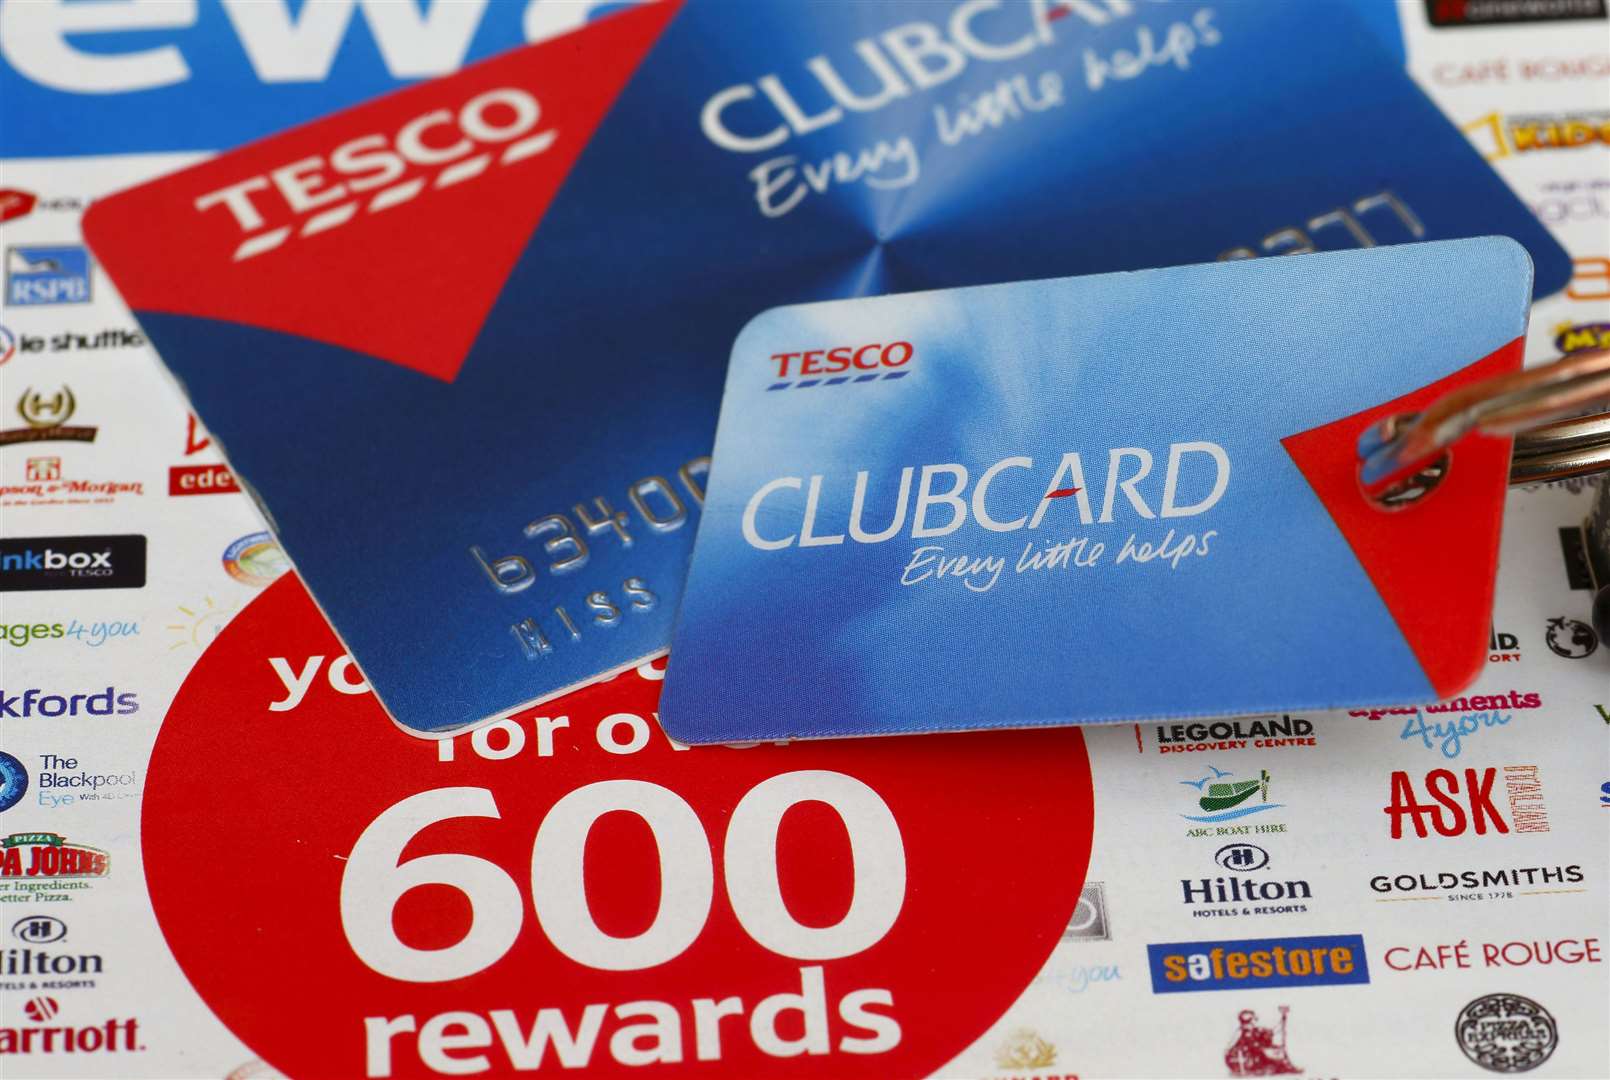 Tesco is embroiled in a High Court fight over a logo on its Clubcard promotions (Chris Ison/PA)